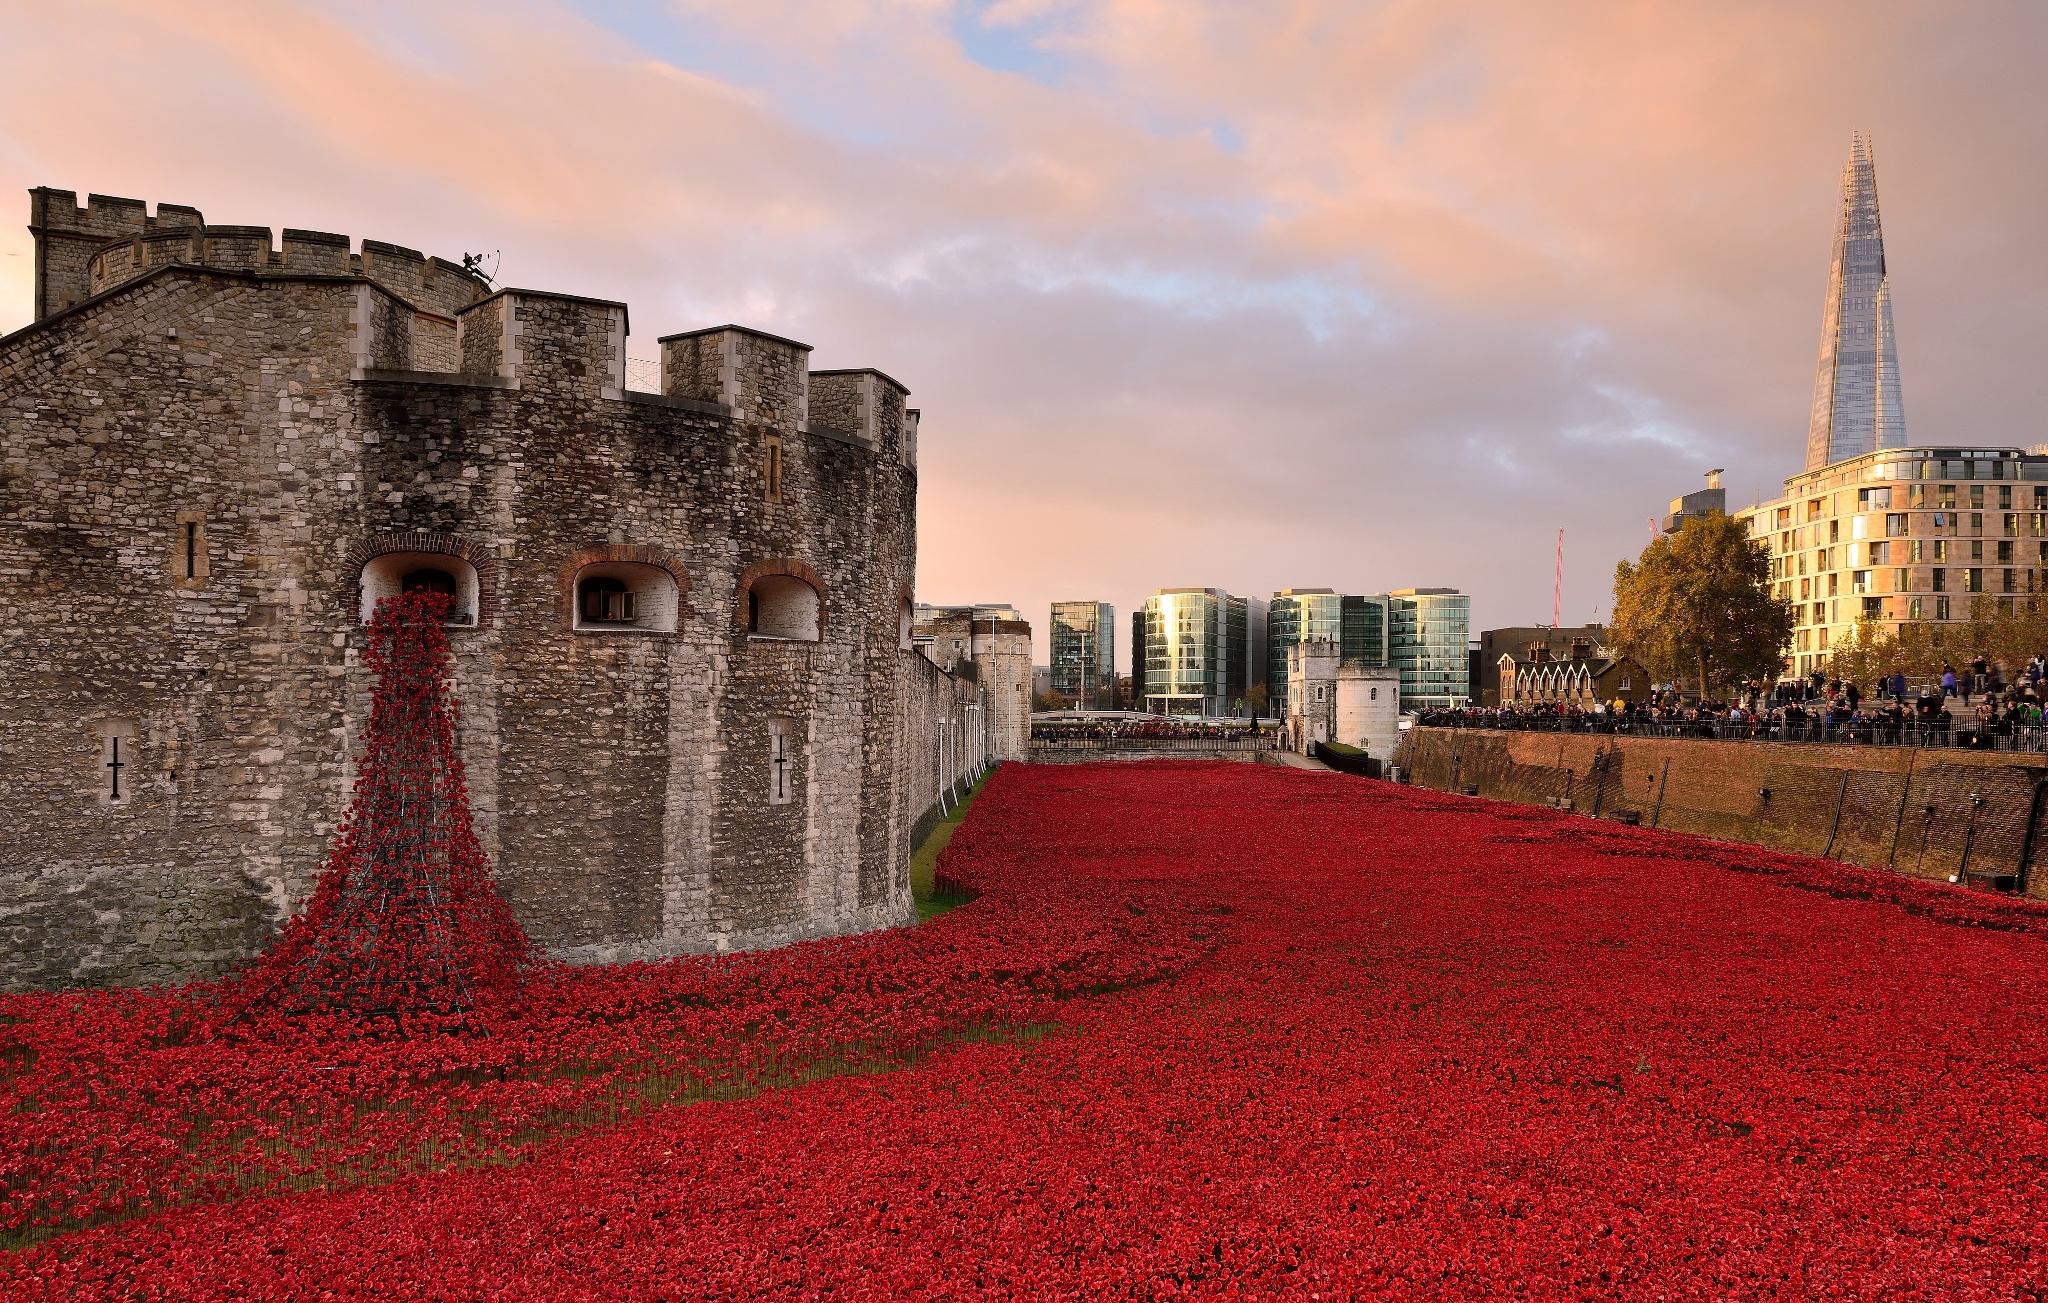 20 Jaw-Dropping Red Poppy Photos In Honor Of Remembrance Day